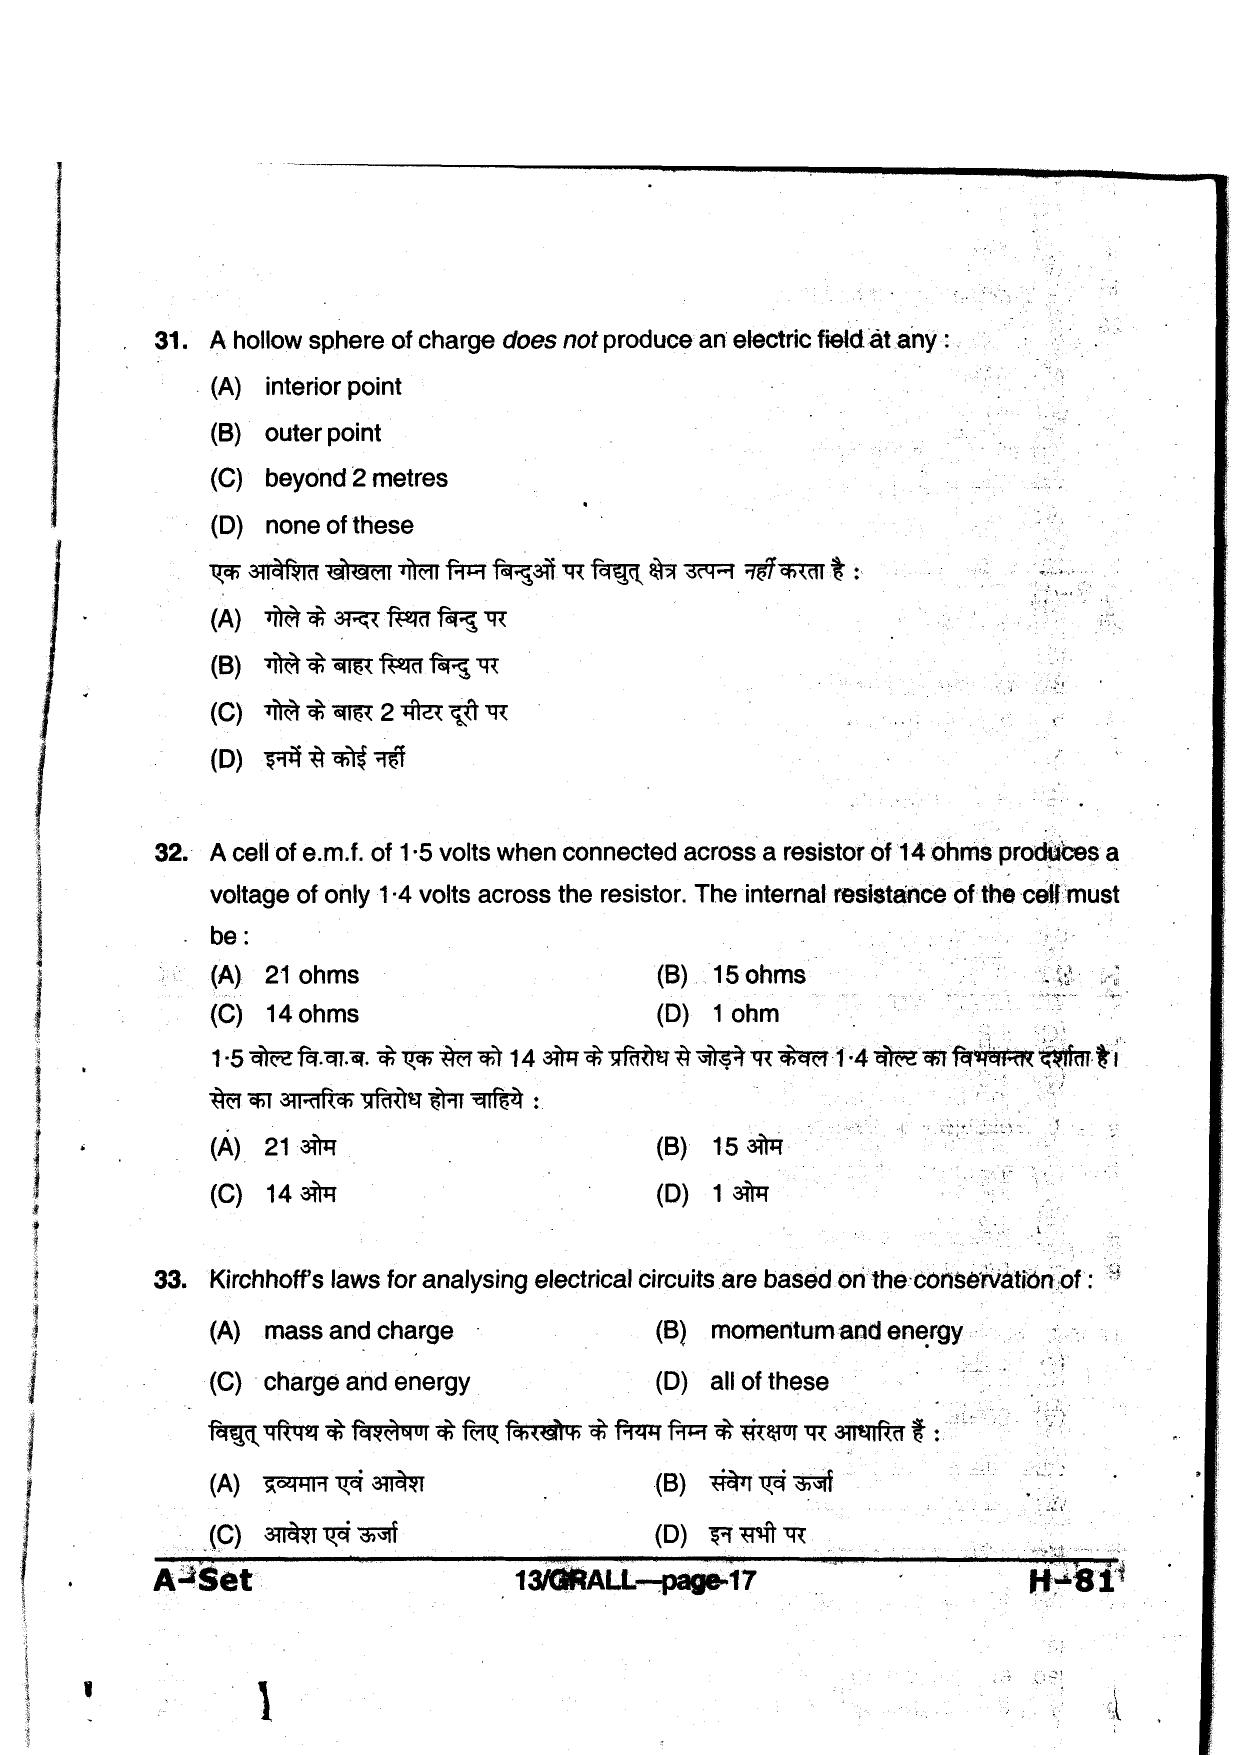 MP PAT 2013 Question Paper - Paper I - Page 17